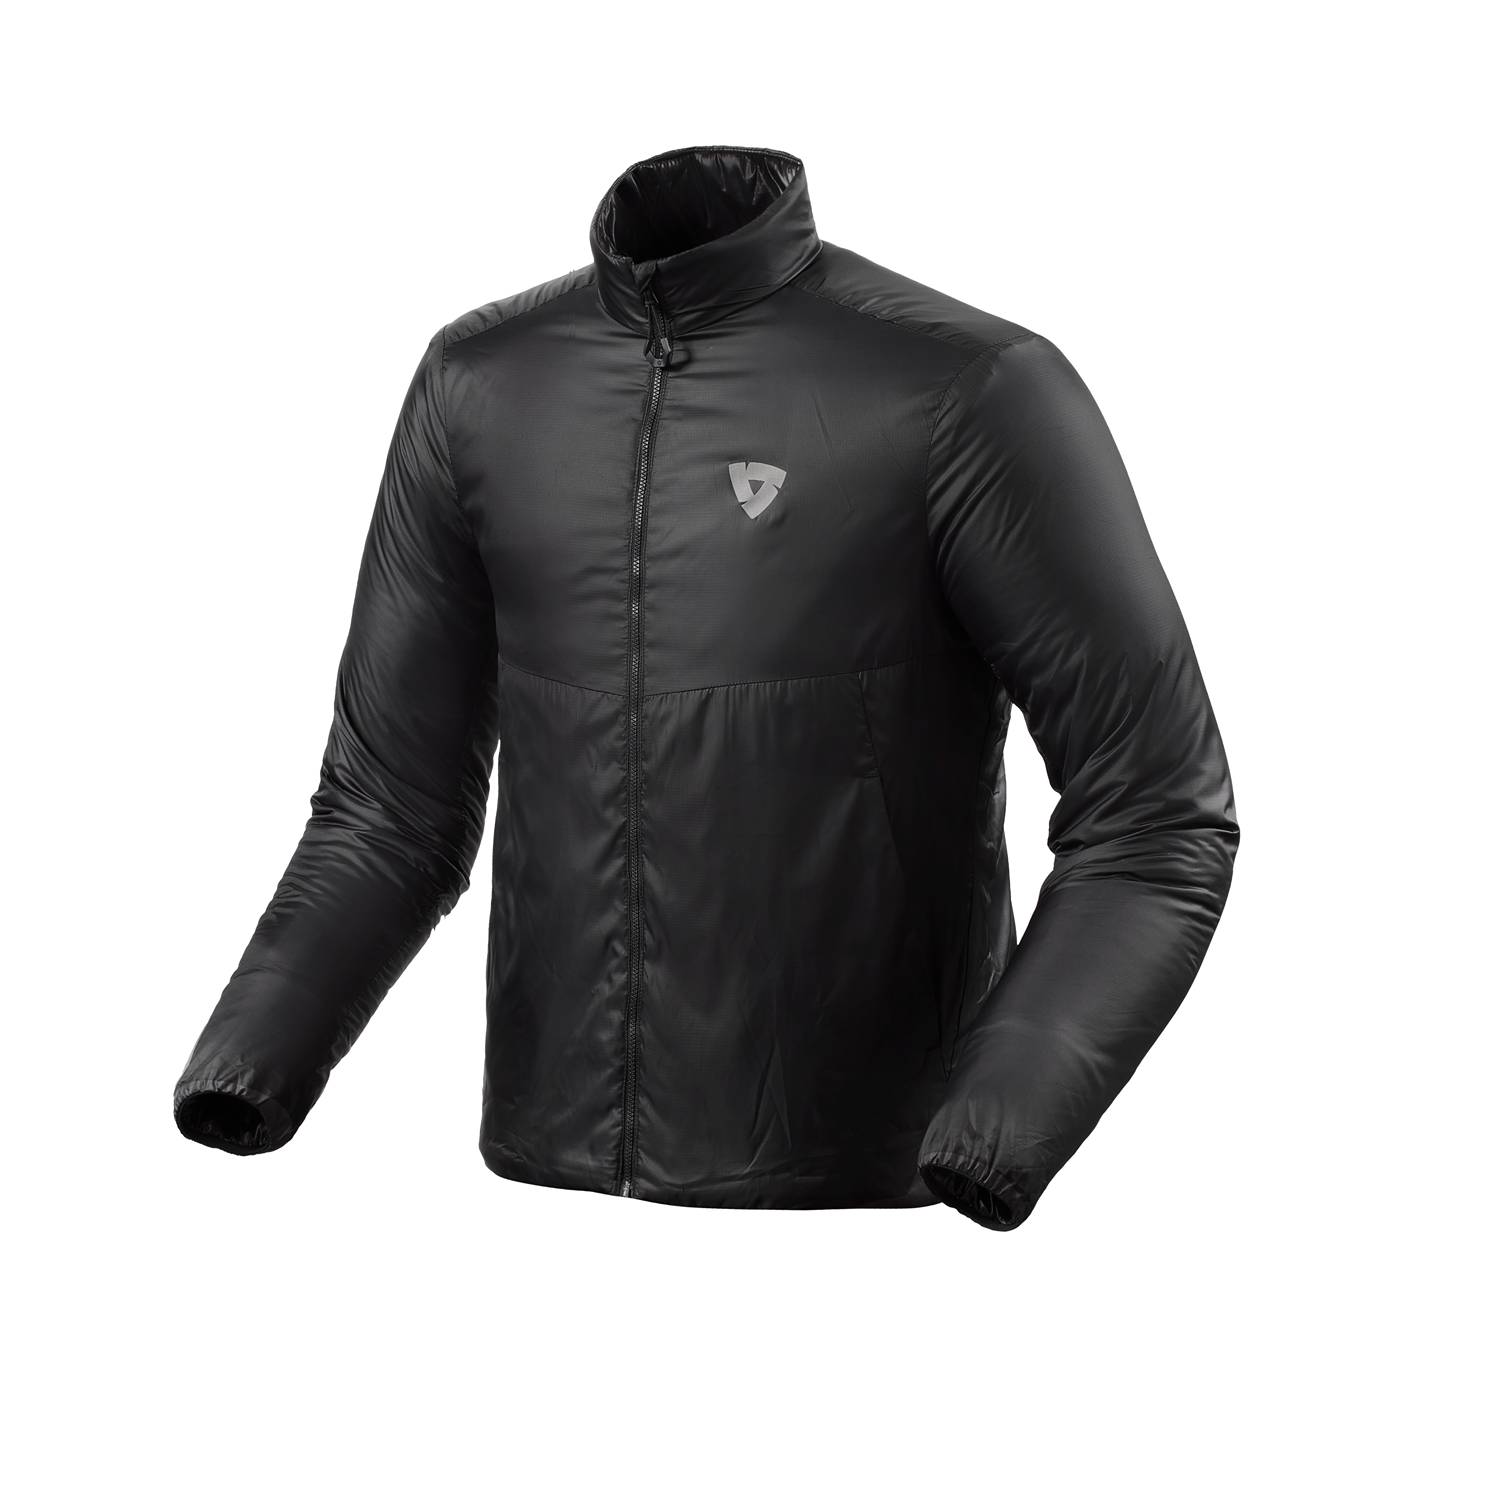 Image of REV'IT! Core 2 Mid Layer Jacket Black Taille M